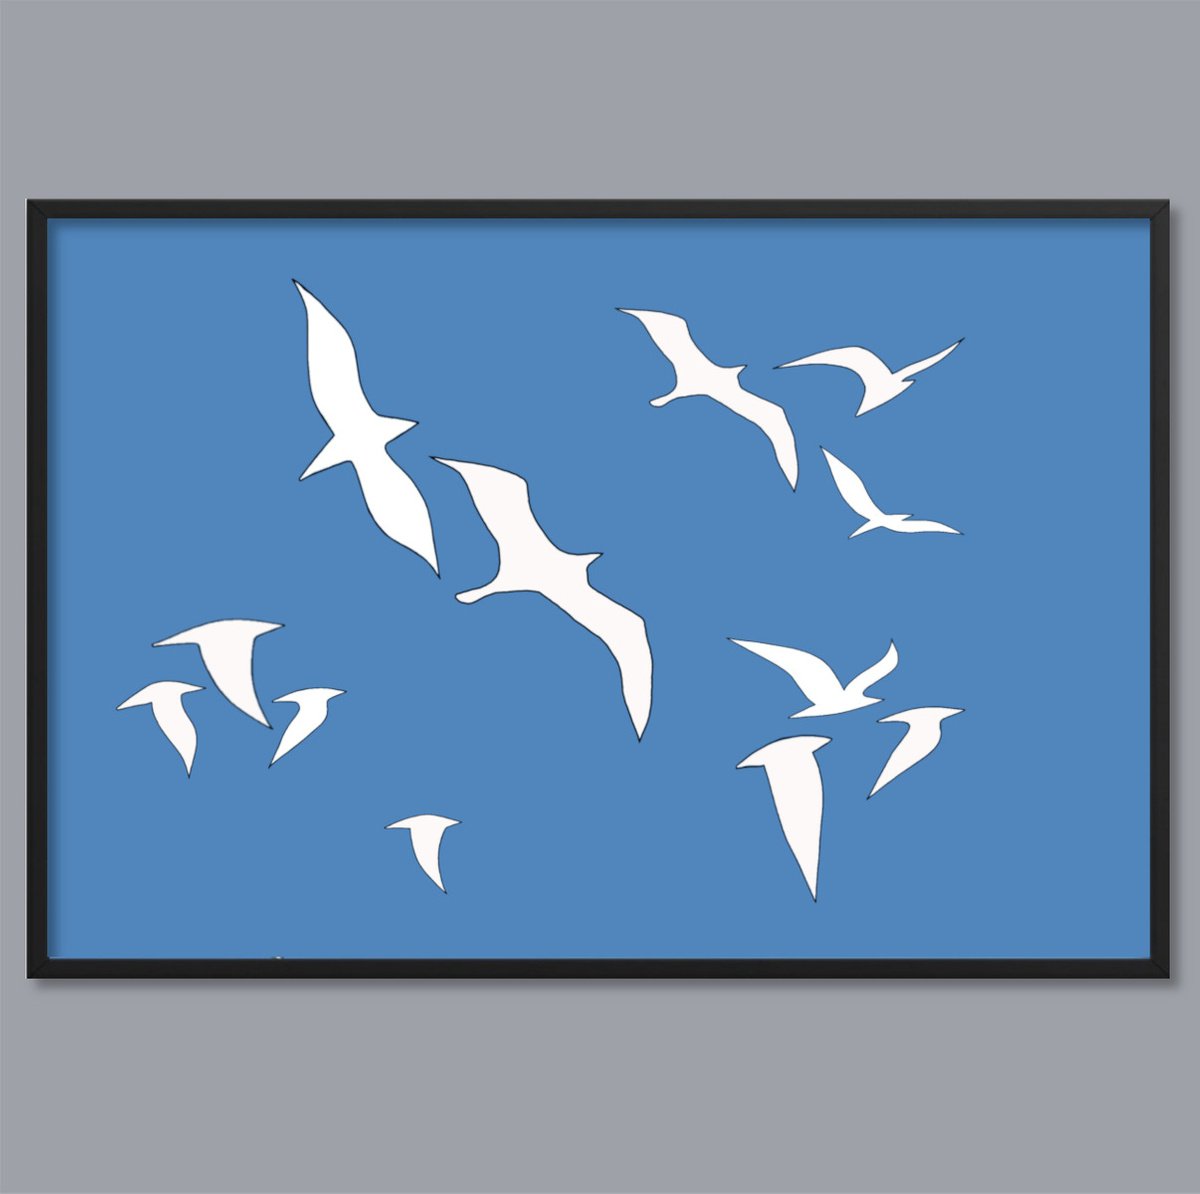 In the Sky #18 - Enhanced Matte Paper Framed Print - Ready to Hang by Marina Krylova